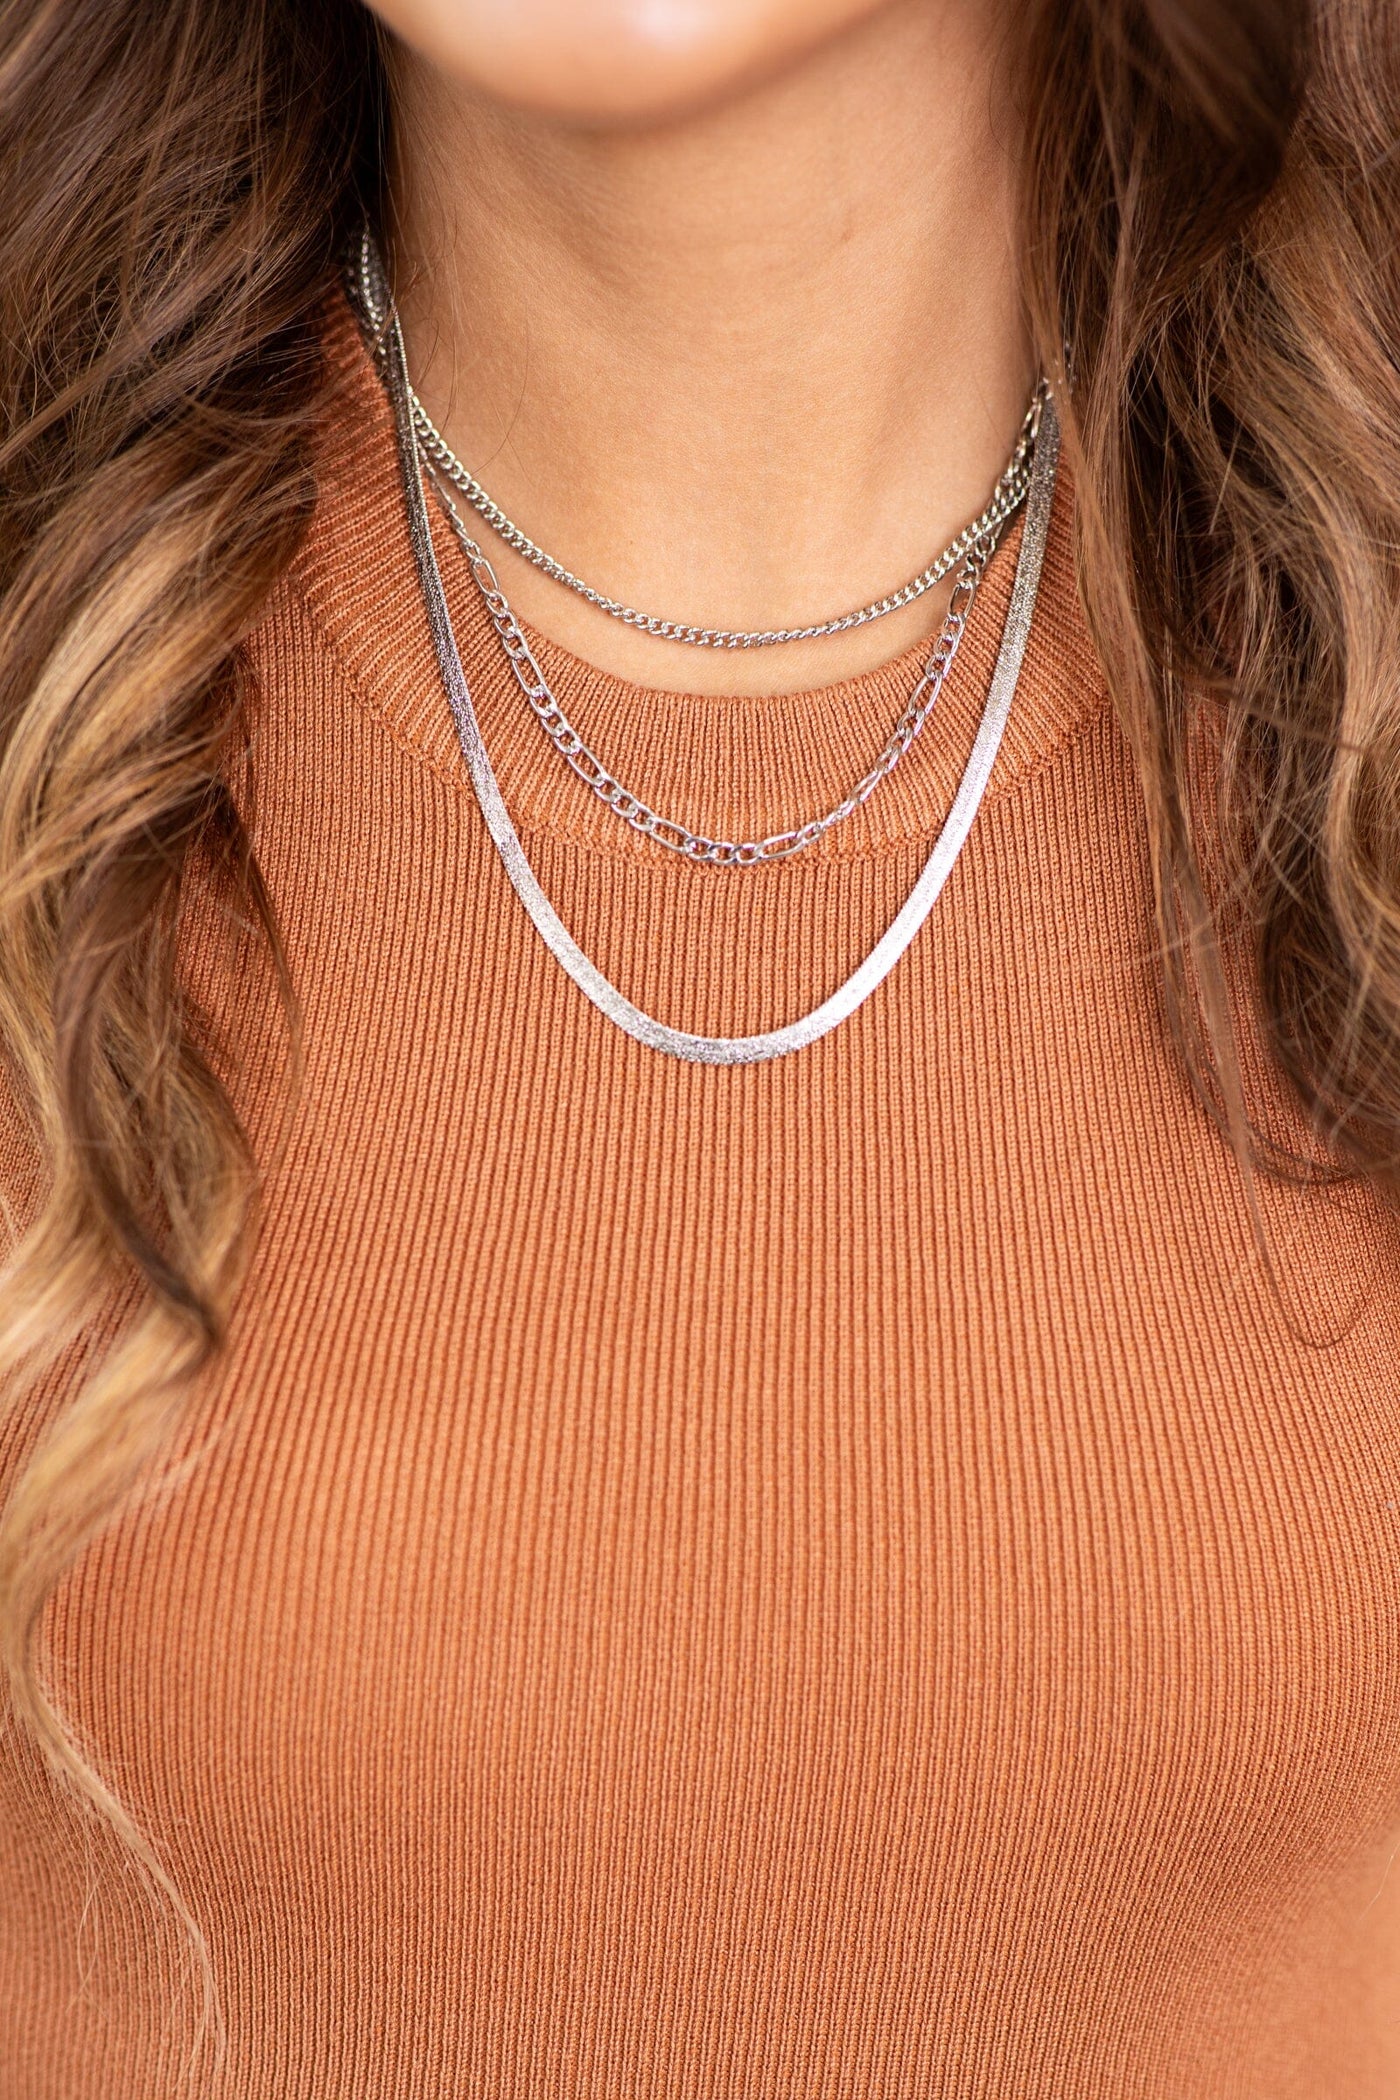 Silver Multi Layer Chain Necklace - Filly Flair